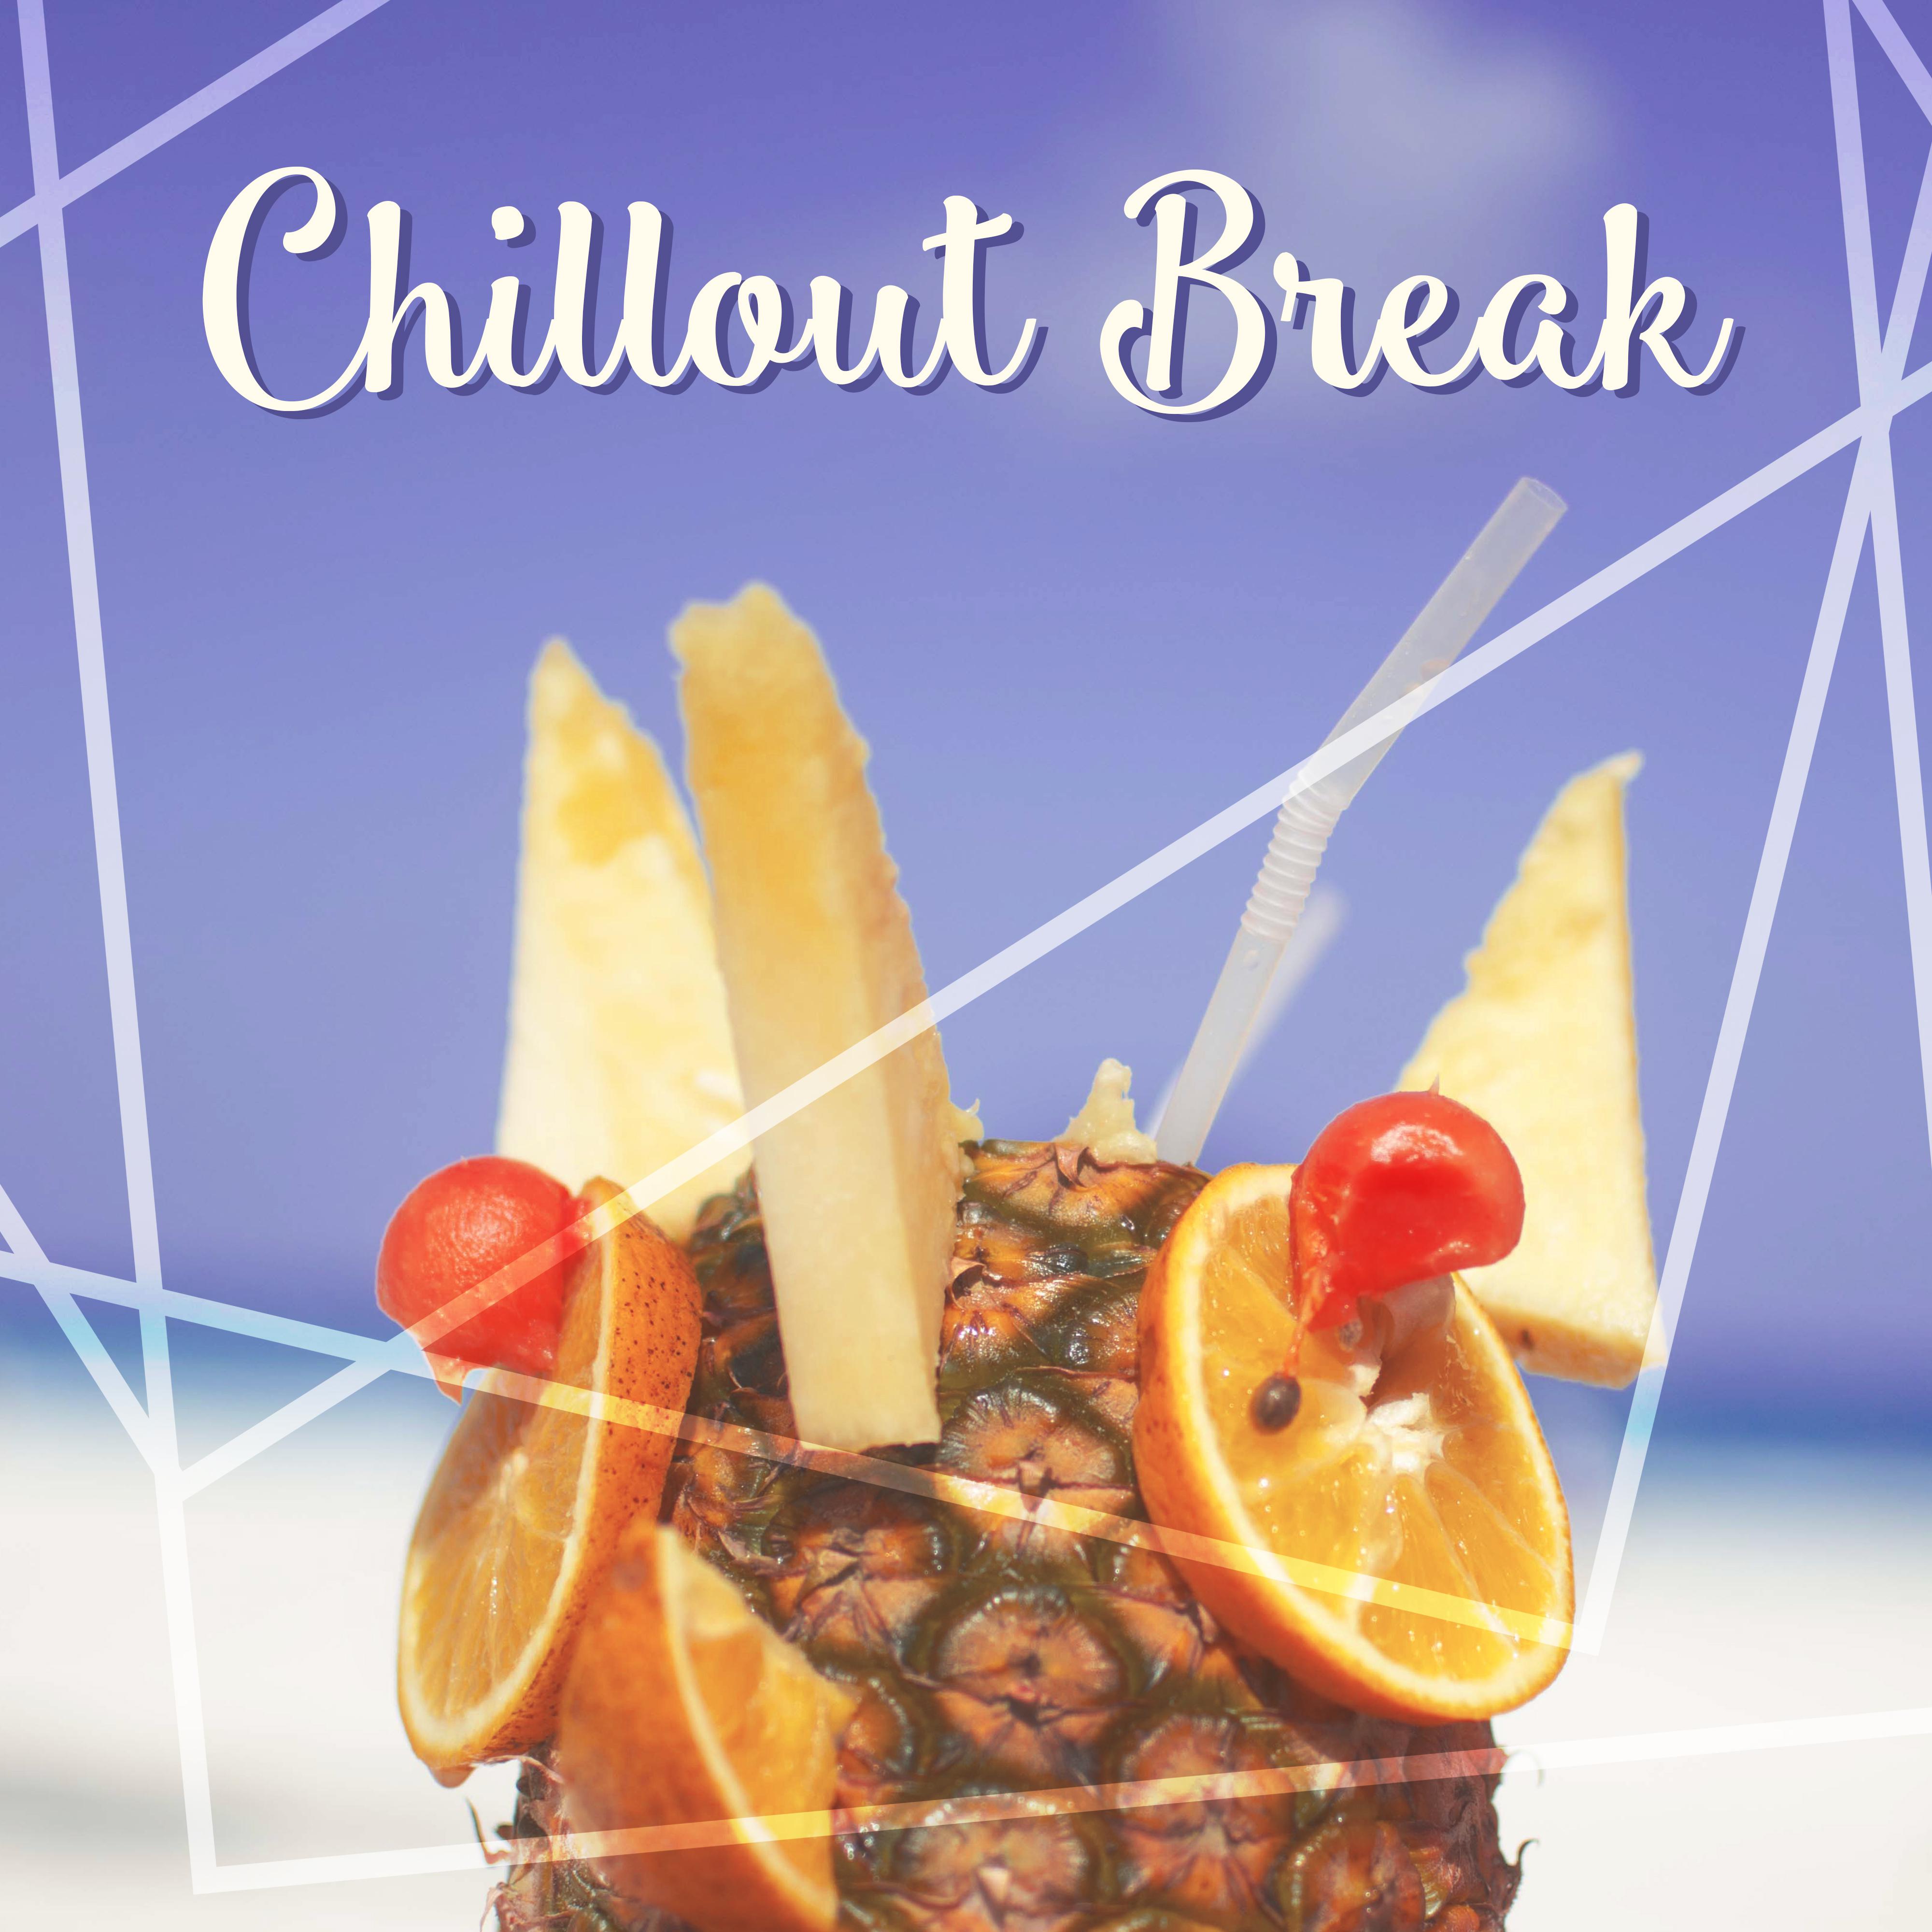 Chillout Break – Fresh Chillout Music, Deep Rest, Ibiza Party, Dancefloor, Sunny Relax